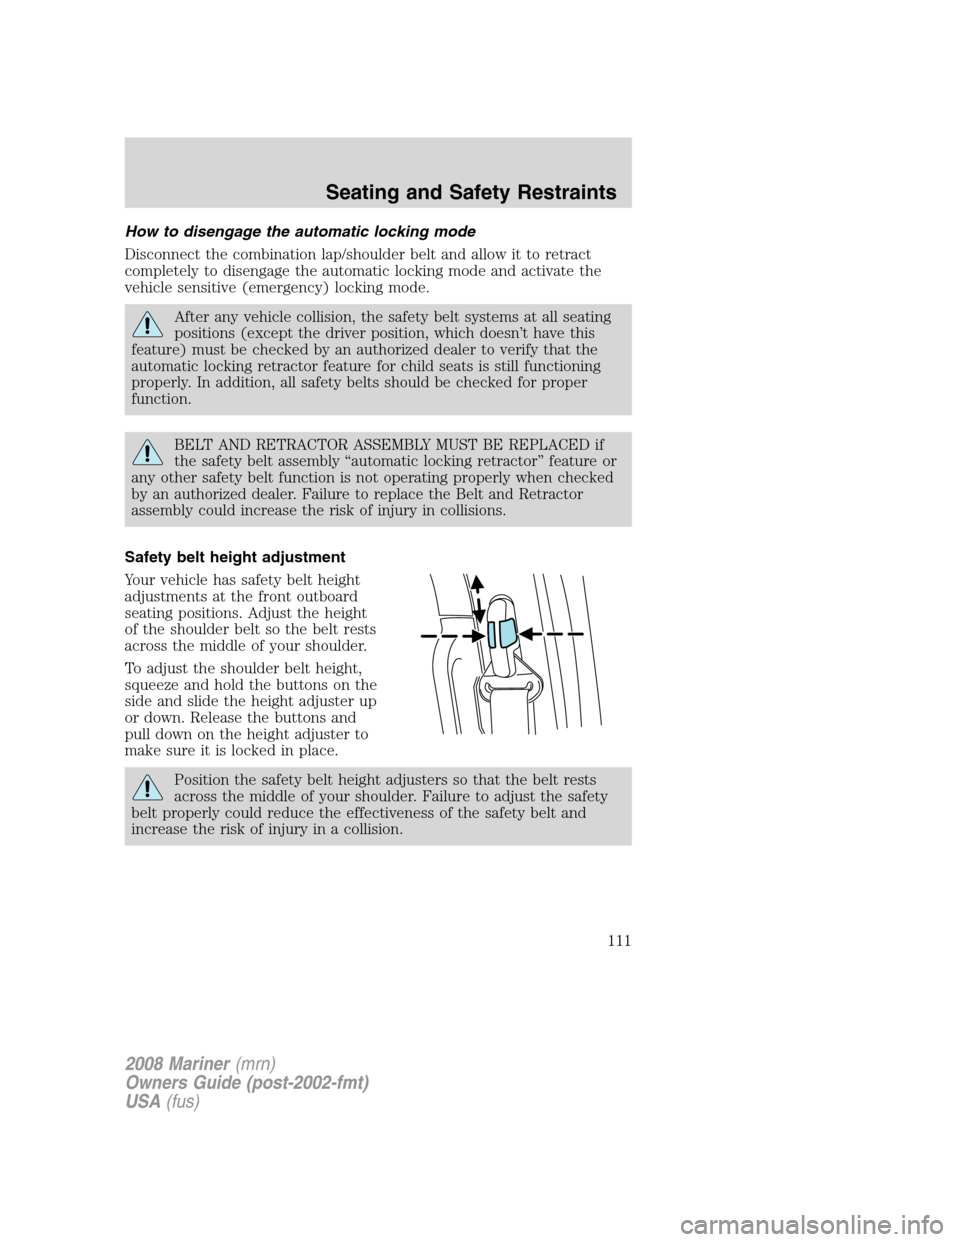 Mercury Mariner 2008  Owners Manuals How to disengage the automatic locking mode
Disconnect the combination lap/shoulder belt and allow it to retract
completely to disengage the automatic locking mode and activate the
vehicle sensitive (